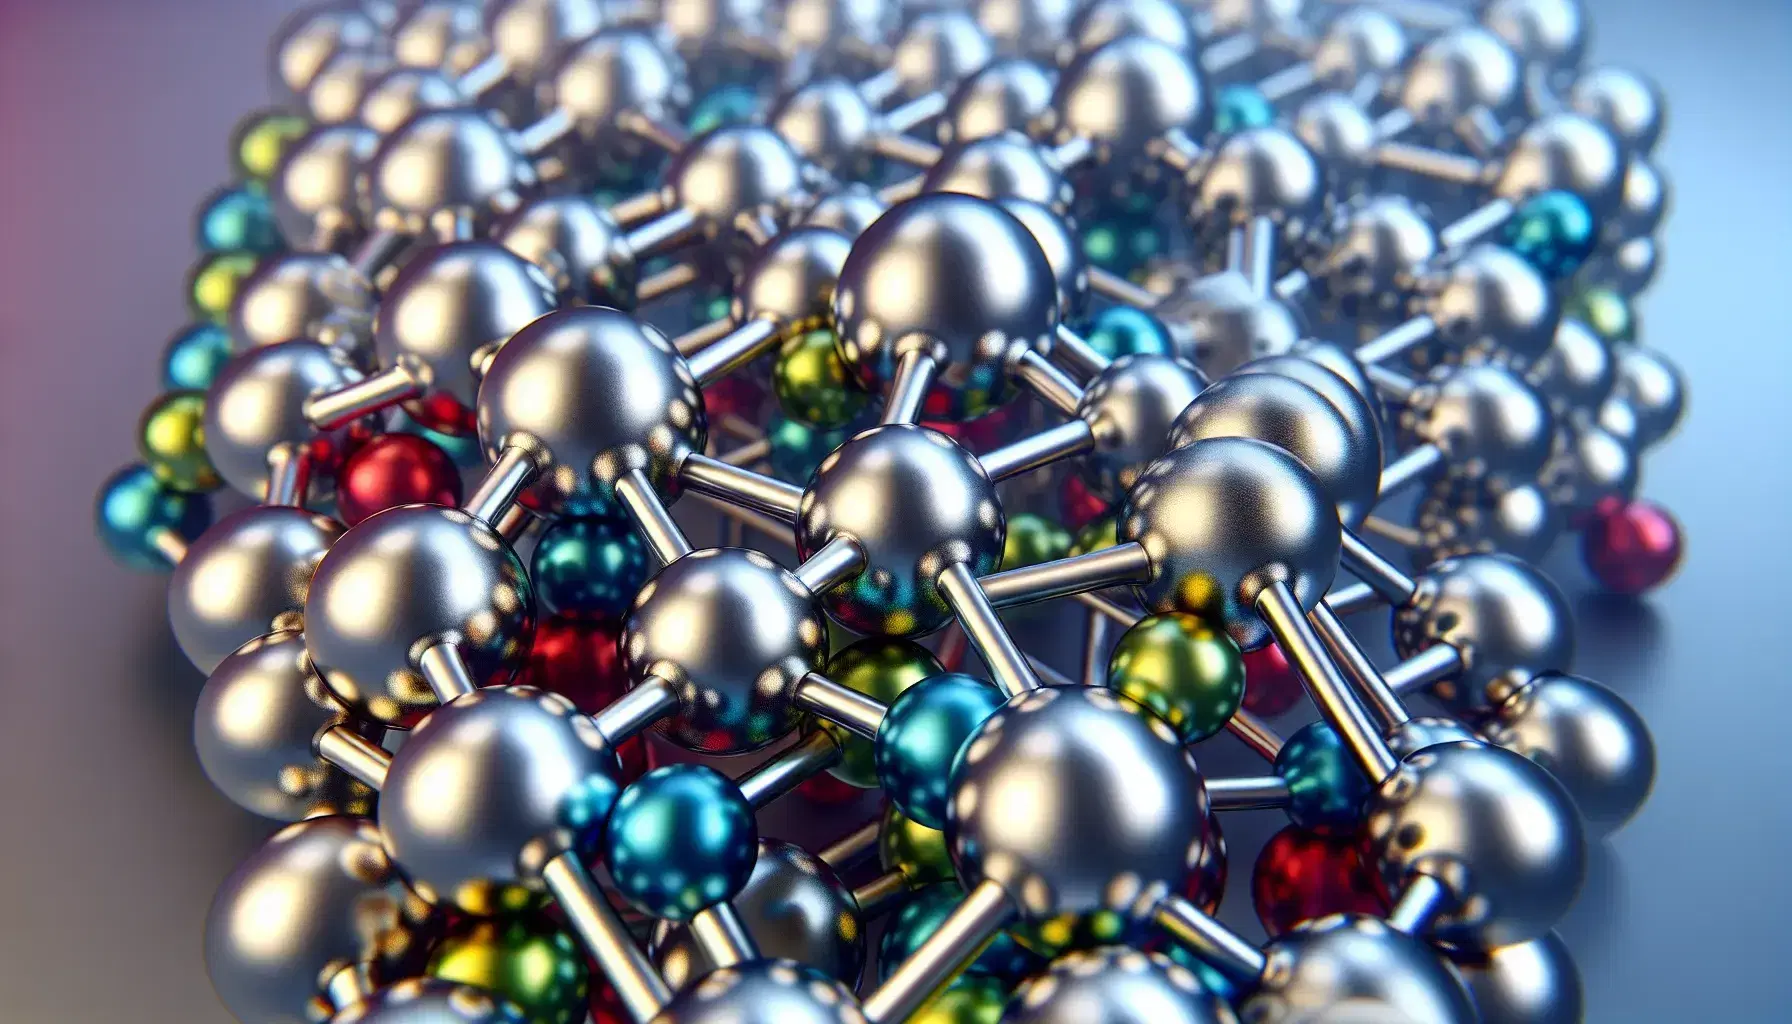 Close-up of a shiny metallic structure with spheres of various sizes and colors connected by rods, resembling a molecule.